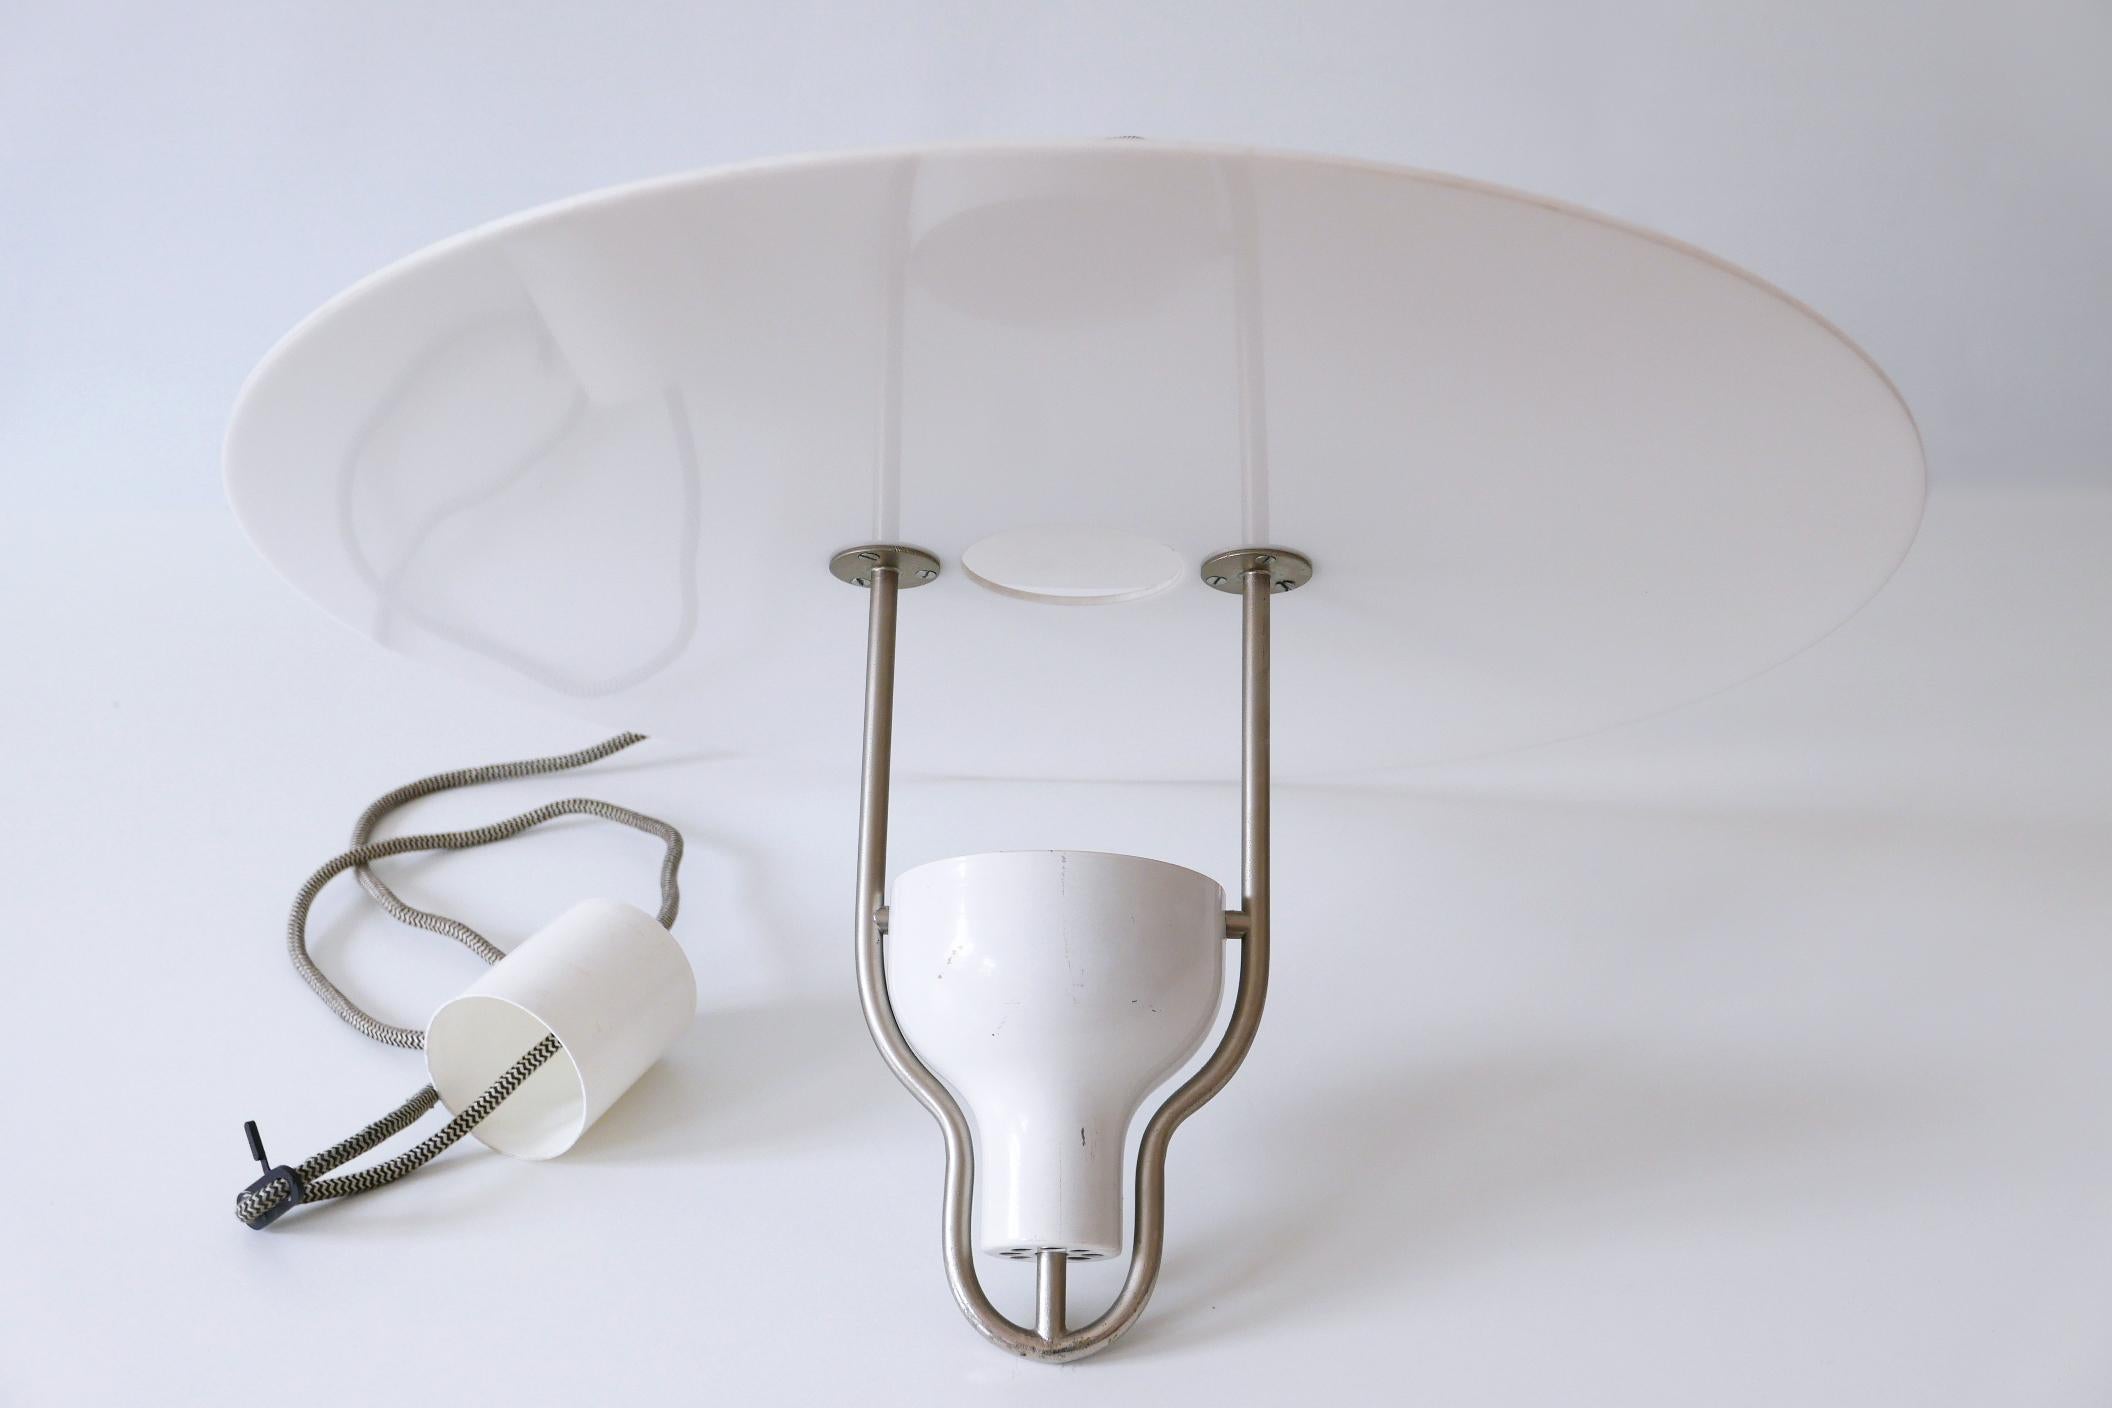 Exceptional Mid-Century Modern Ufo Pendant Lamp, Italy, 1960s For Sale 12